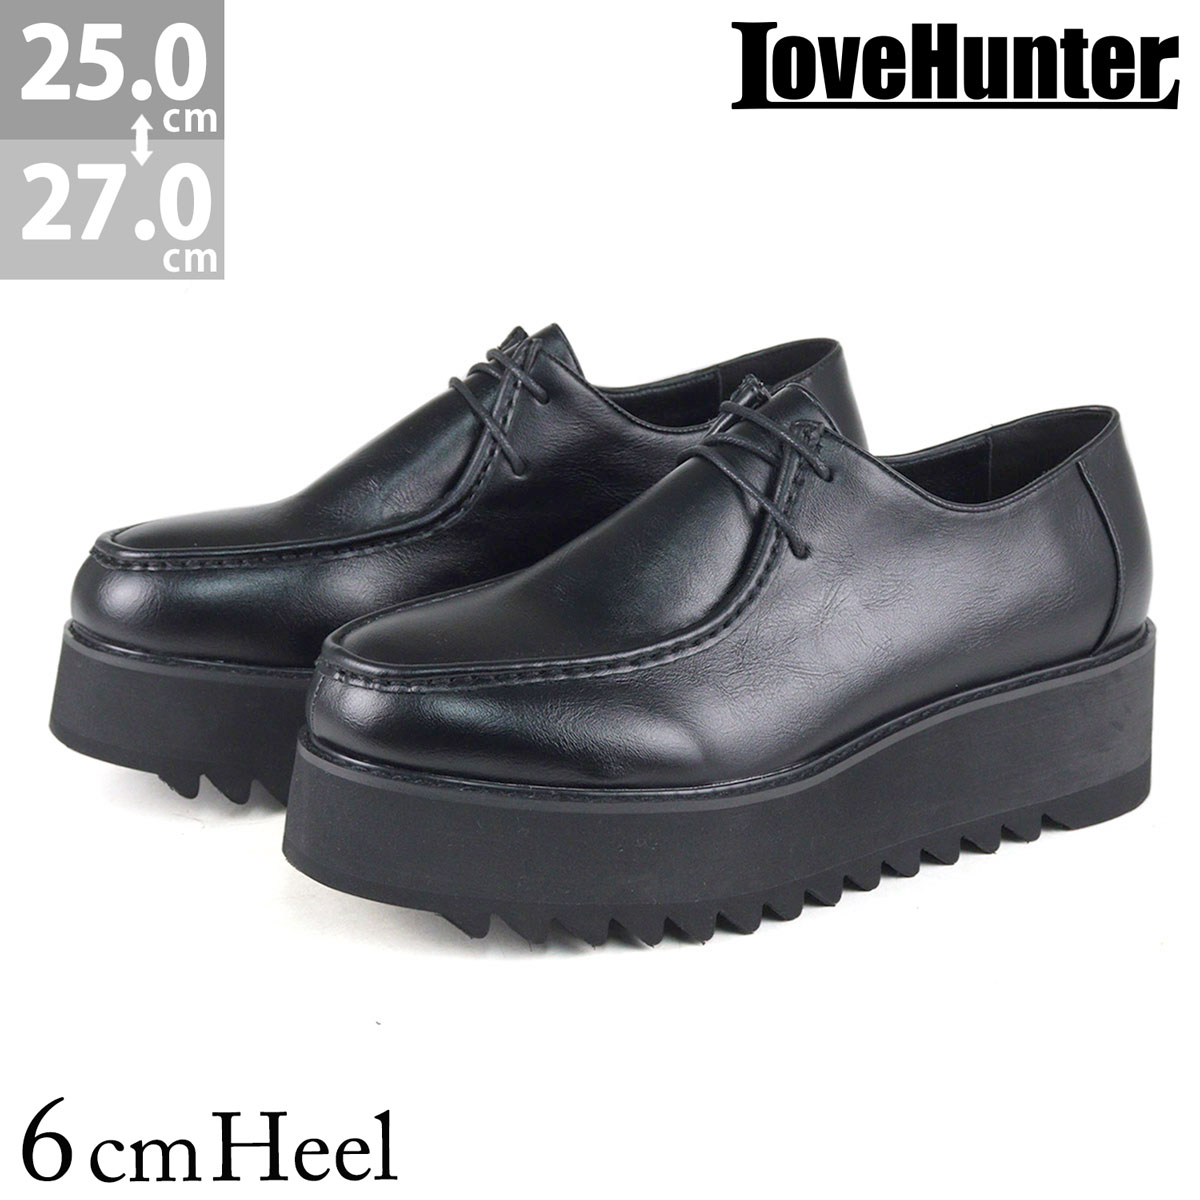  leather shoes men's casual black thickness bottom race up tyrolean light ..... leather synthetic leather gentleman 3E 25-27cm No.1733 Rav Hunter 